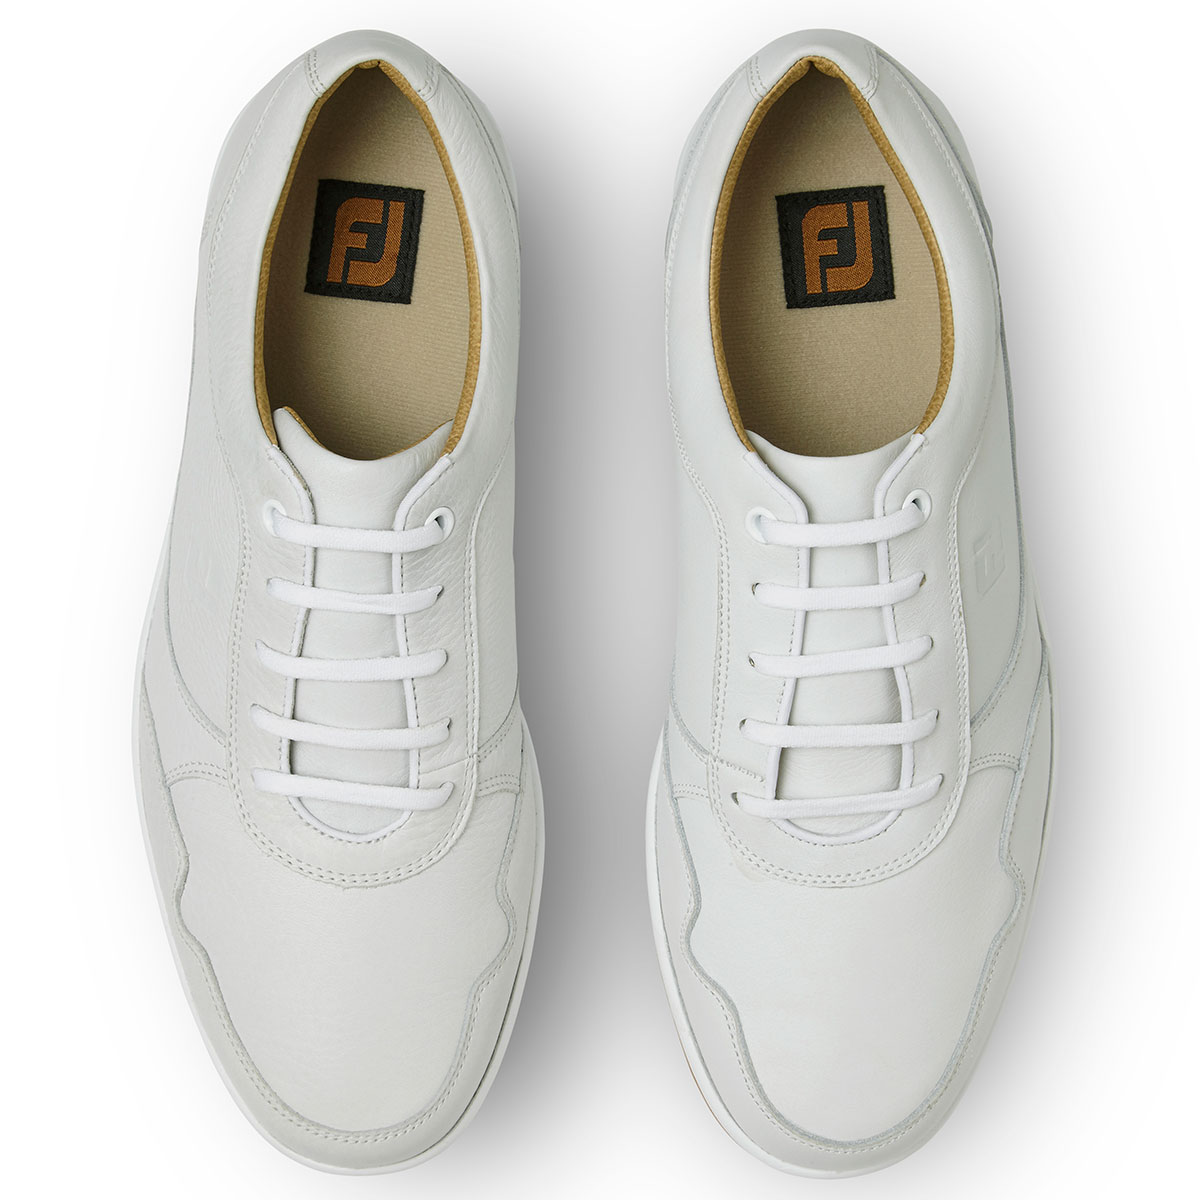 FootJoy Golf Casual Shoes from american 